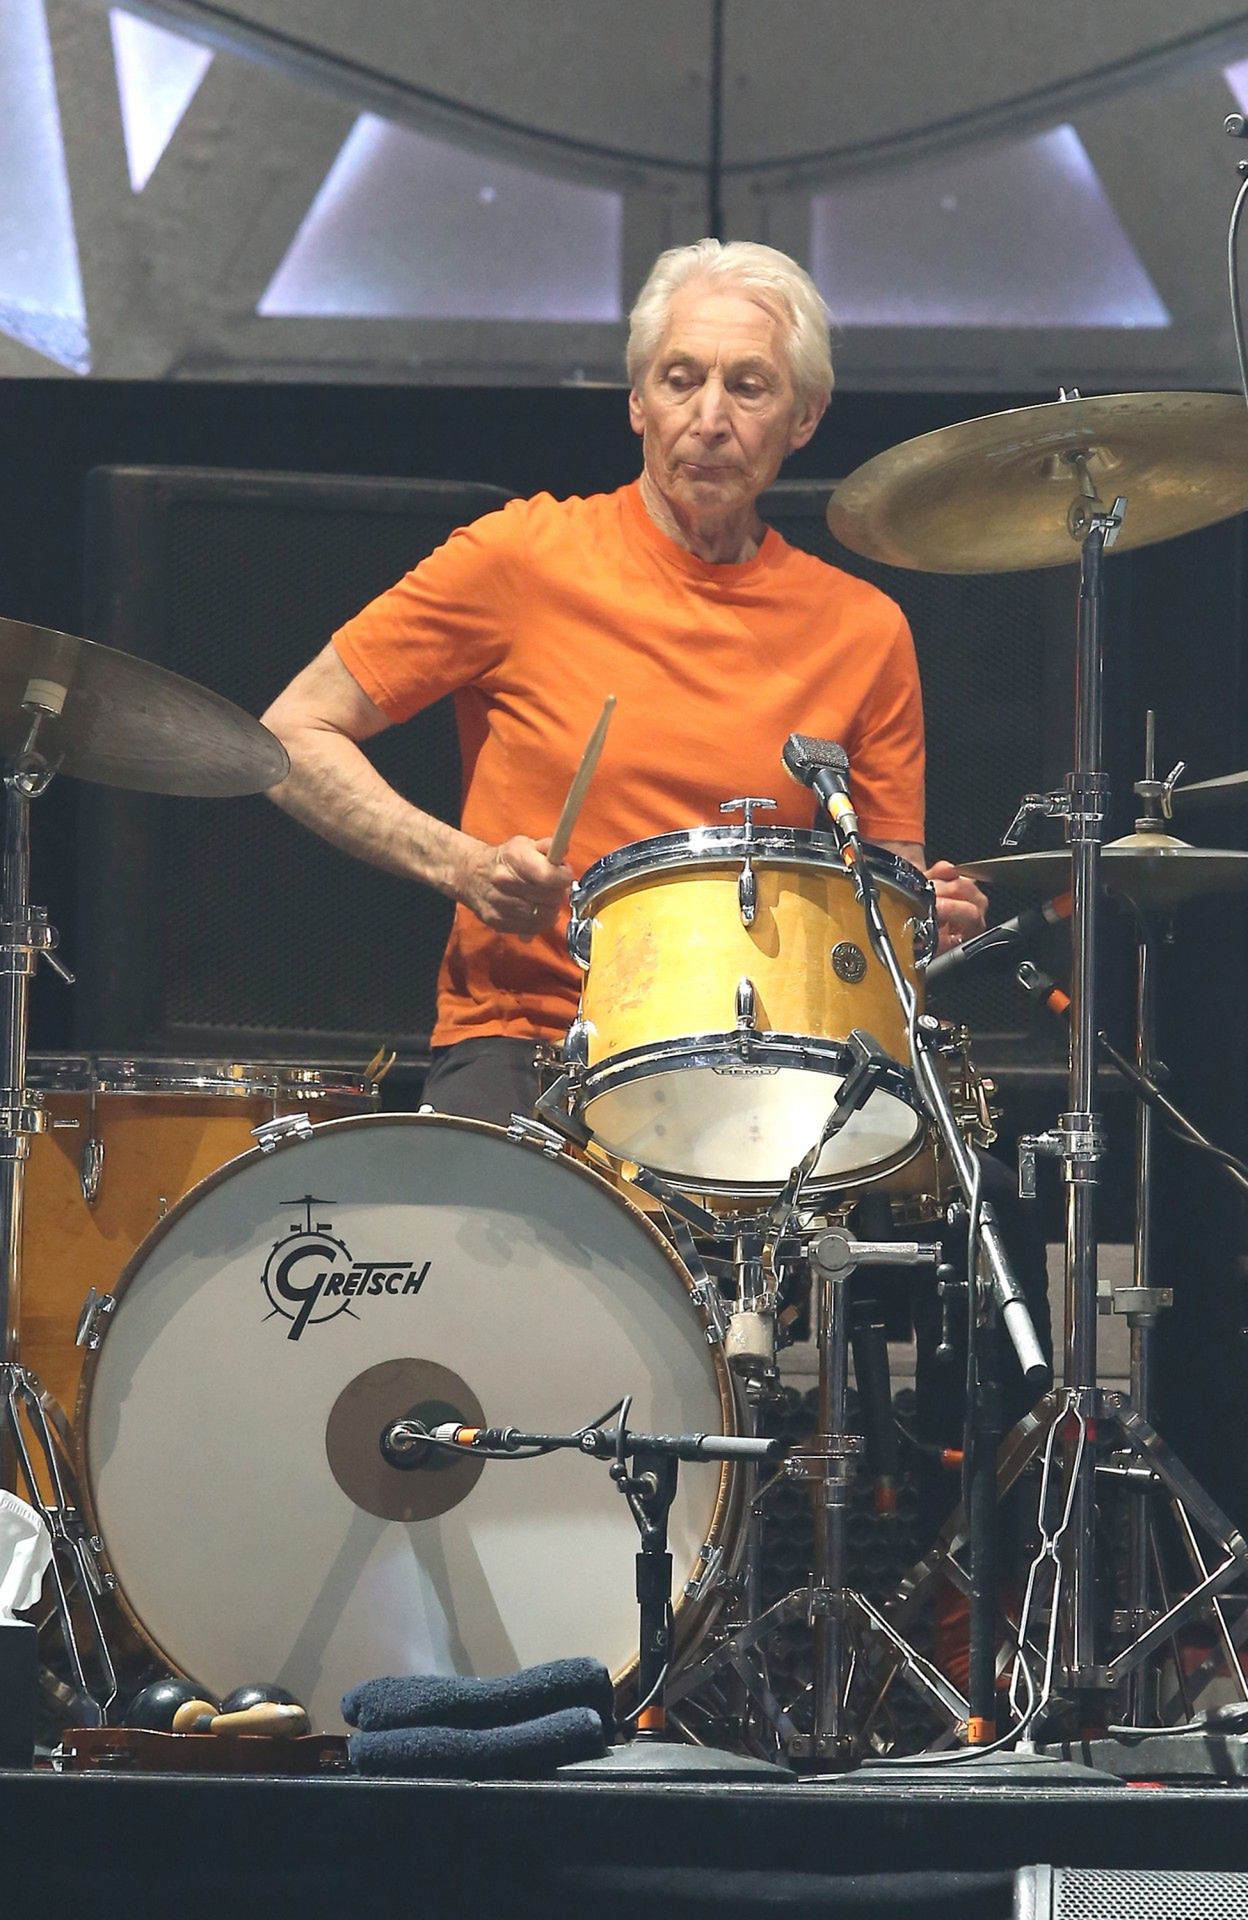 22 October 2016 - Las Vegas, NV -  The Rolling Stones, Charlie Watts.  The Rolling Stones perform at T-Mobile Arena.  
CAP/ADM/MJT
© MJT/ADM/Capital Pictures